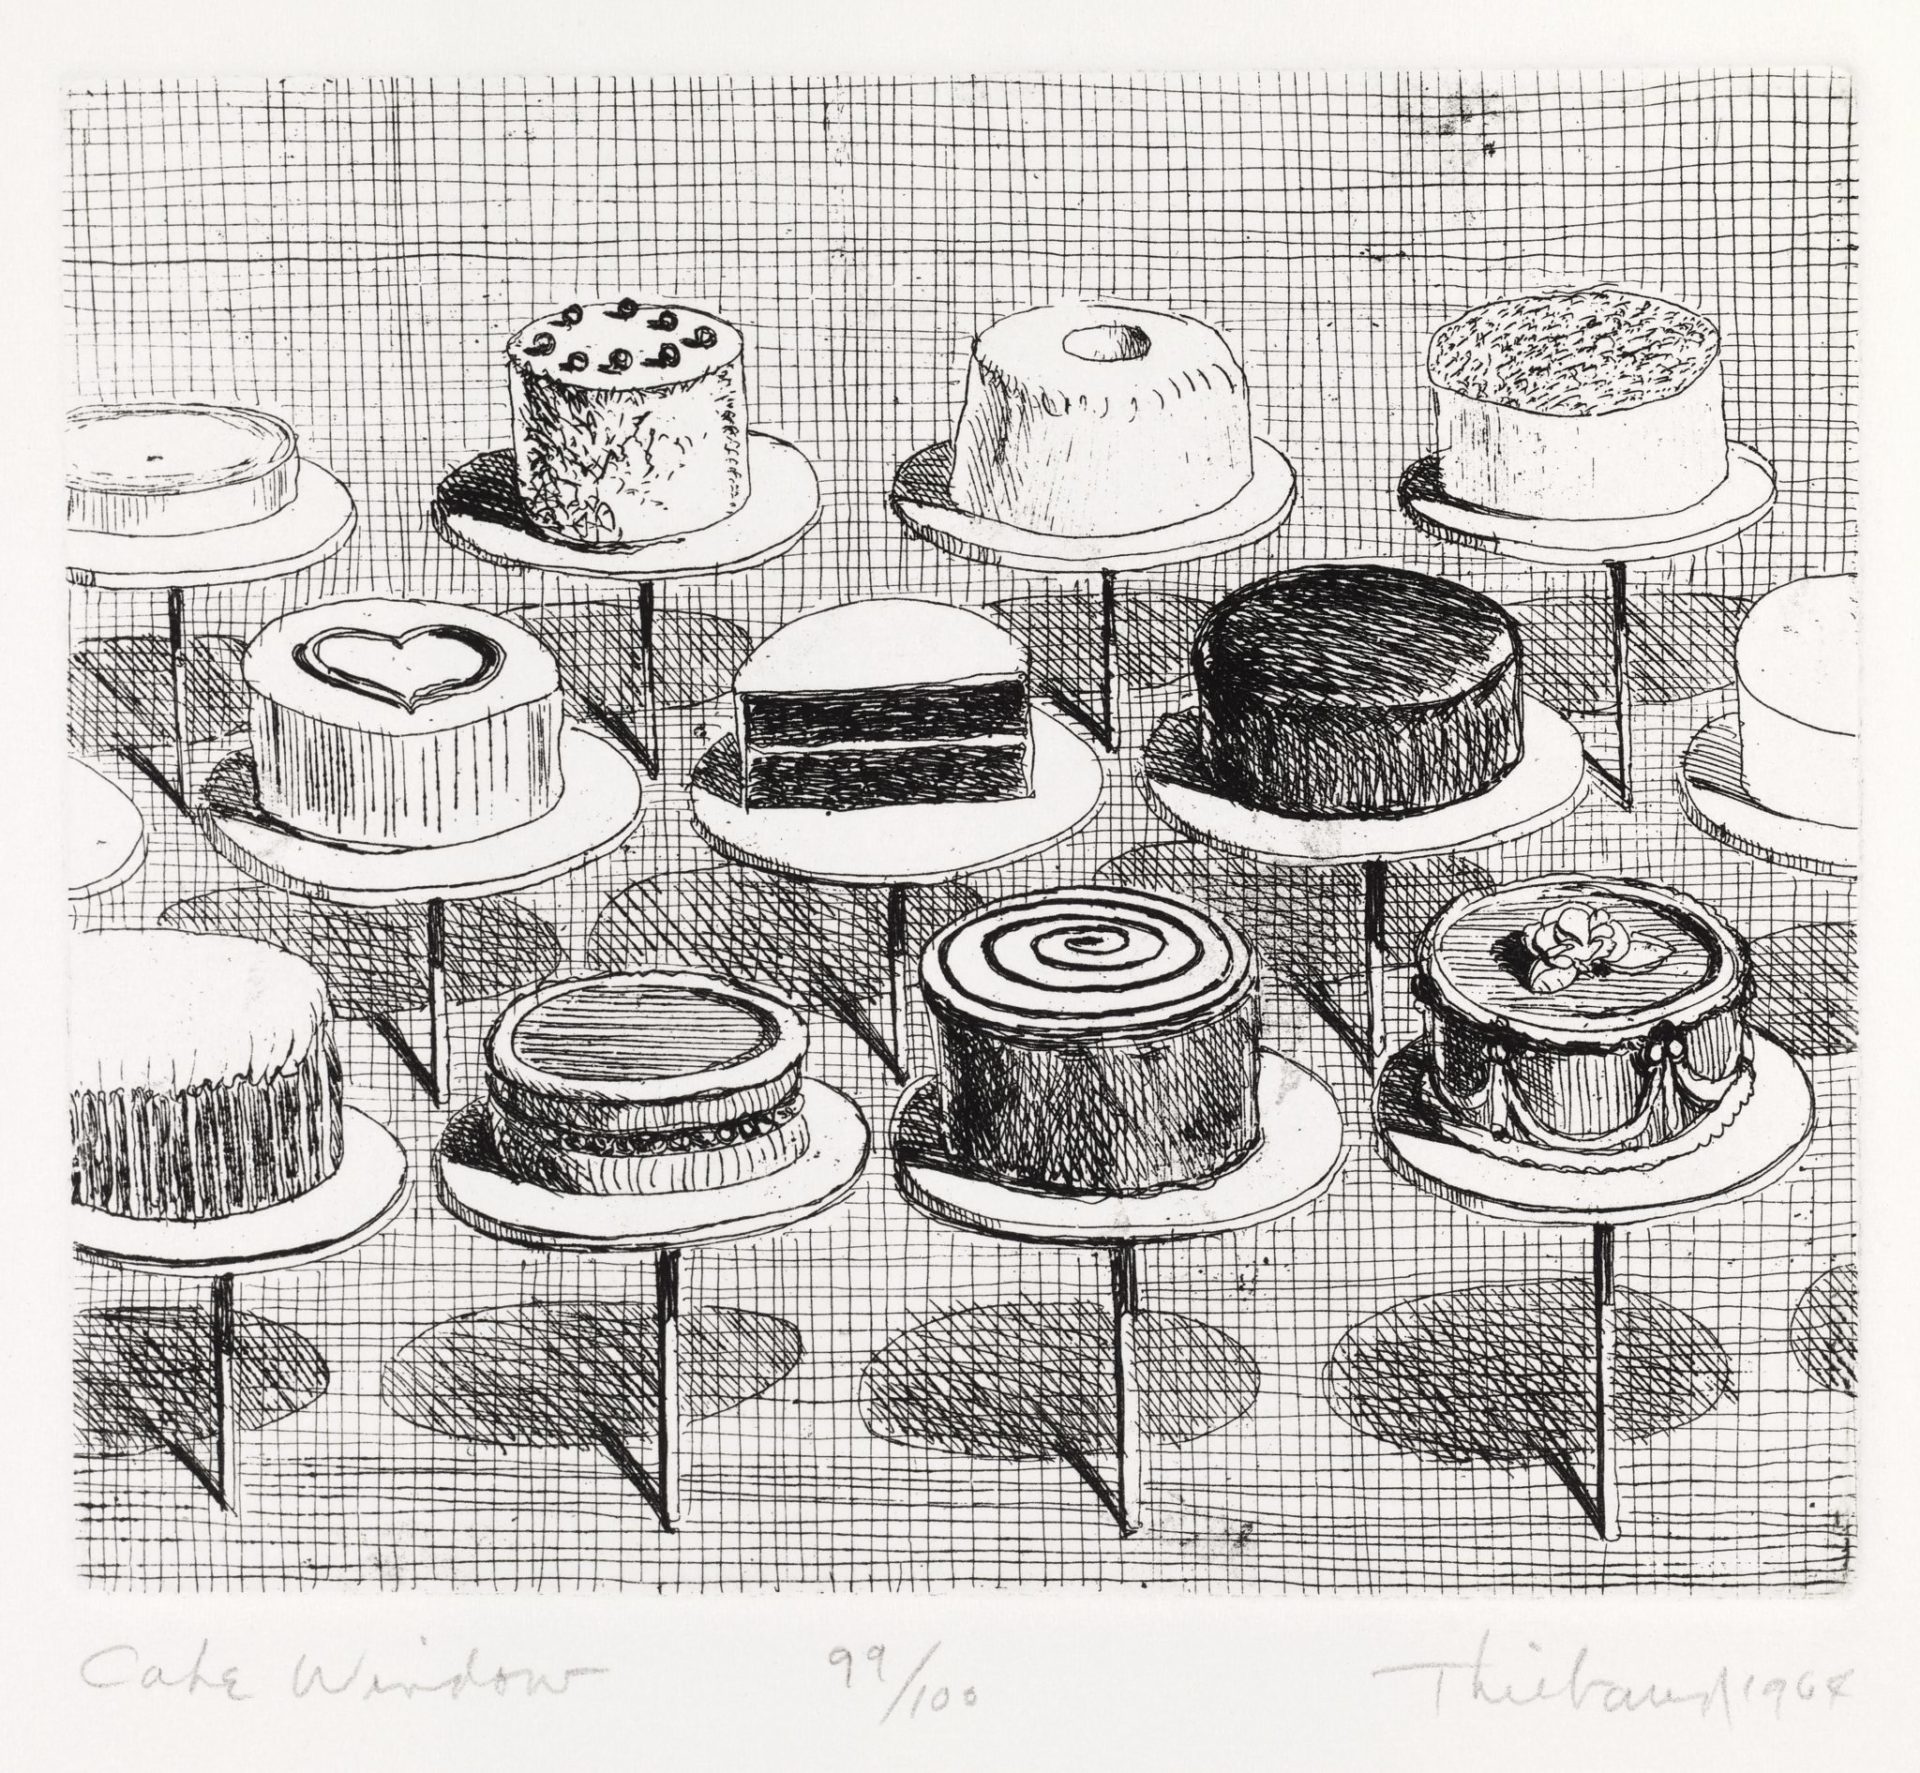 Wayne Thiebaud, Cake Window, from Delights series, 1964. Etching, 4 15/16 x 5 7/8 in. (plate), 12 3/4 x 10 3/4 in. (sheet). Crocker Art Museum, gift of the Artist’s family, 1995.9.1.13. © 2021 Wayne Thiebaud / Licensed by VAGA at Artists Rights Society (ARS), NY.